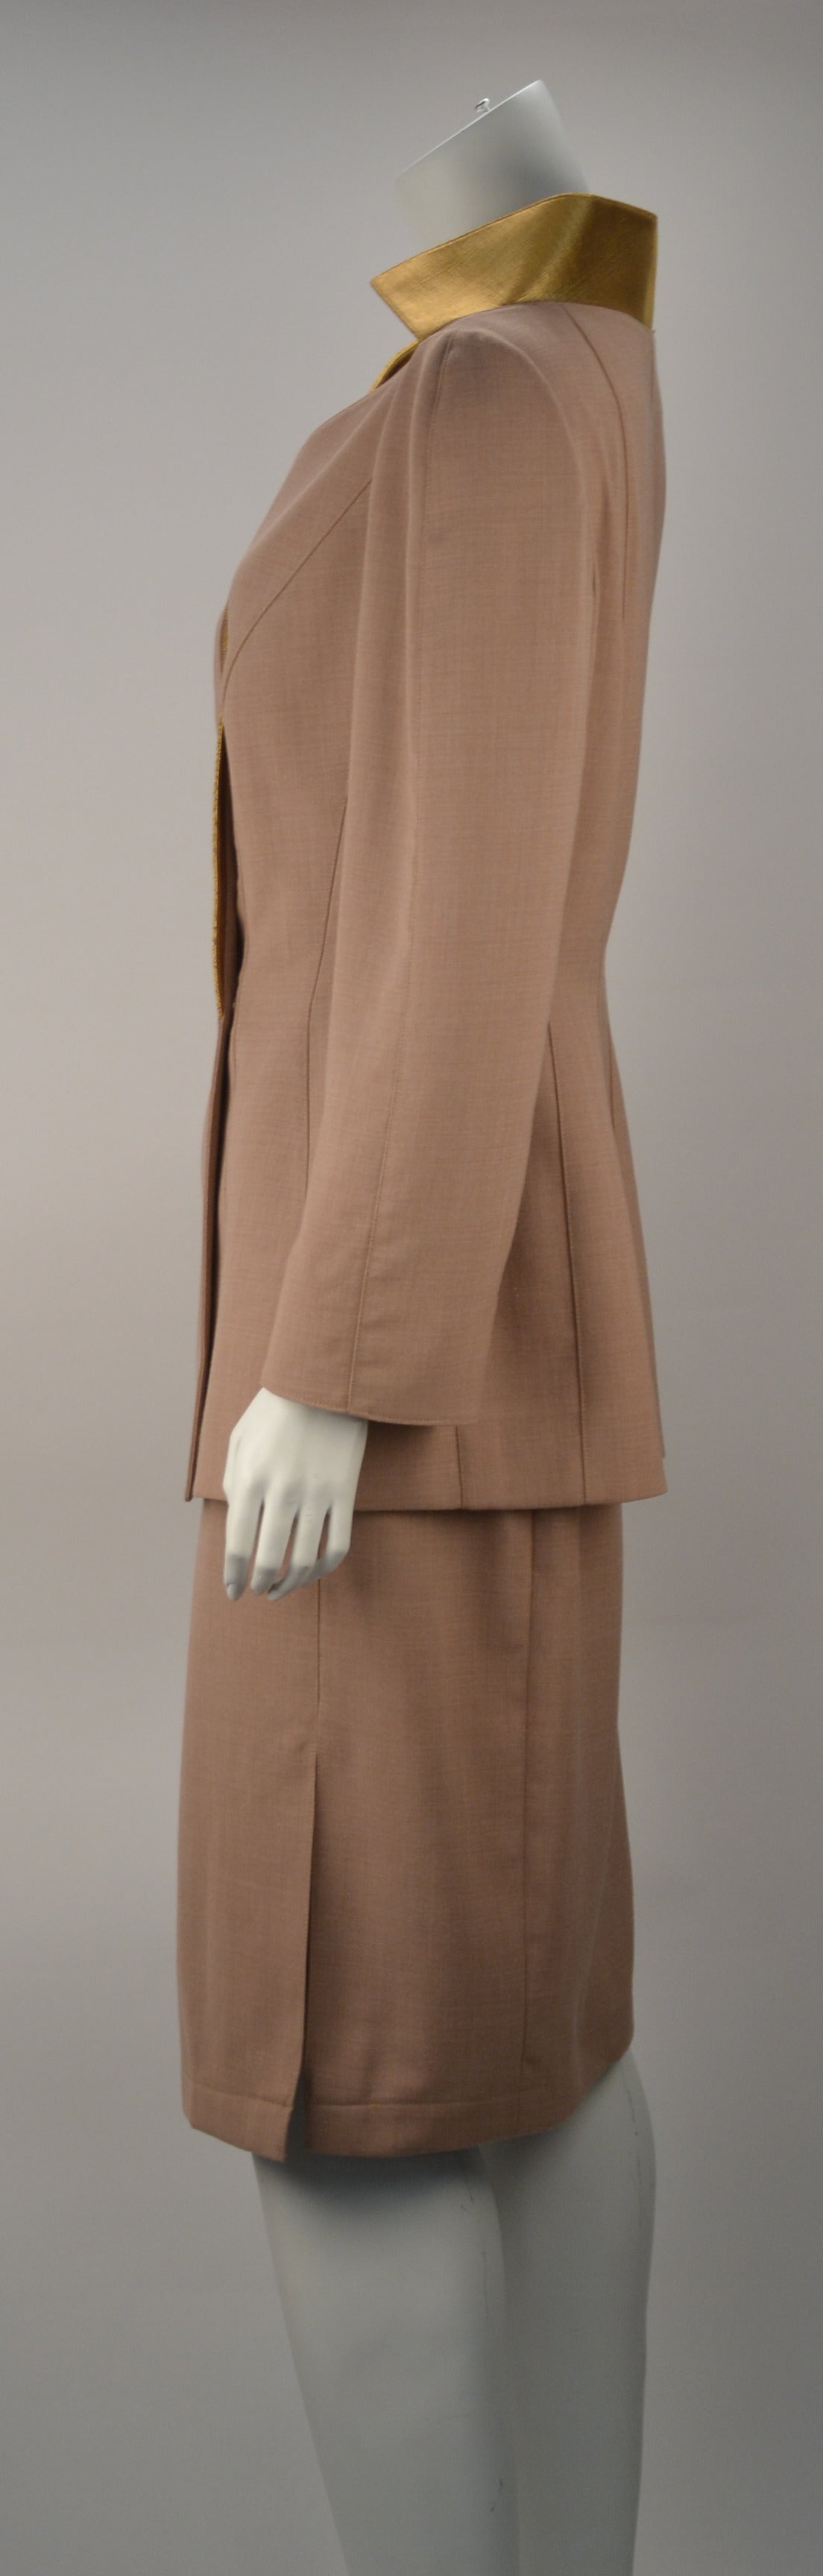 Mugler couture two piece suit. Suit has a lapel that goes around the neckline in contrasting color, v-neck, two buttons on the front. Princess seams for fit on the jacket, full sleeve in beige color. Matching semi fit skirt with side pleat back